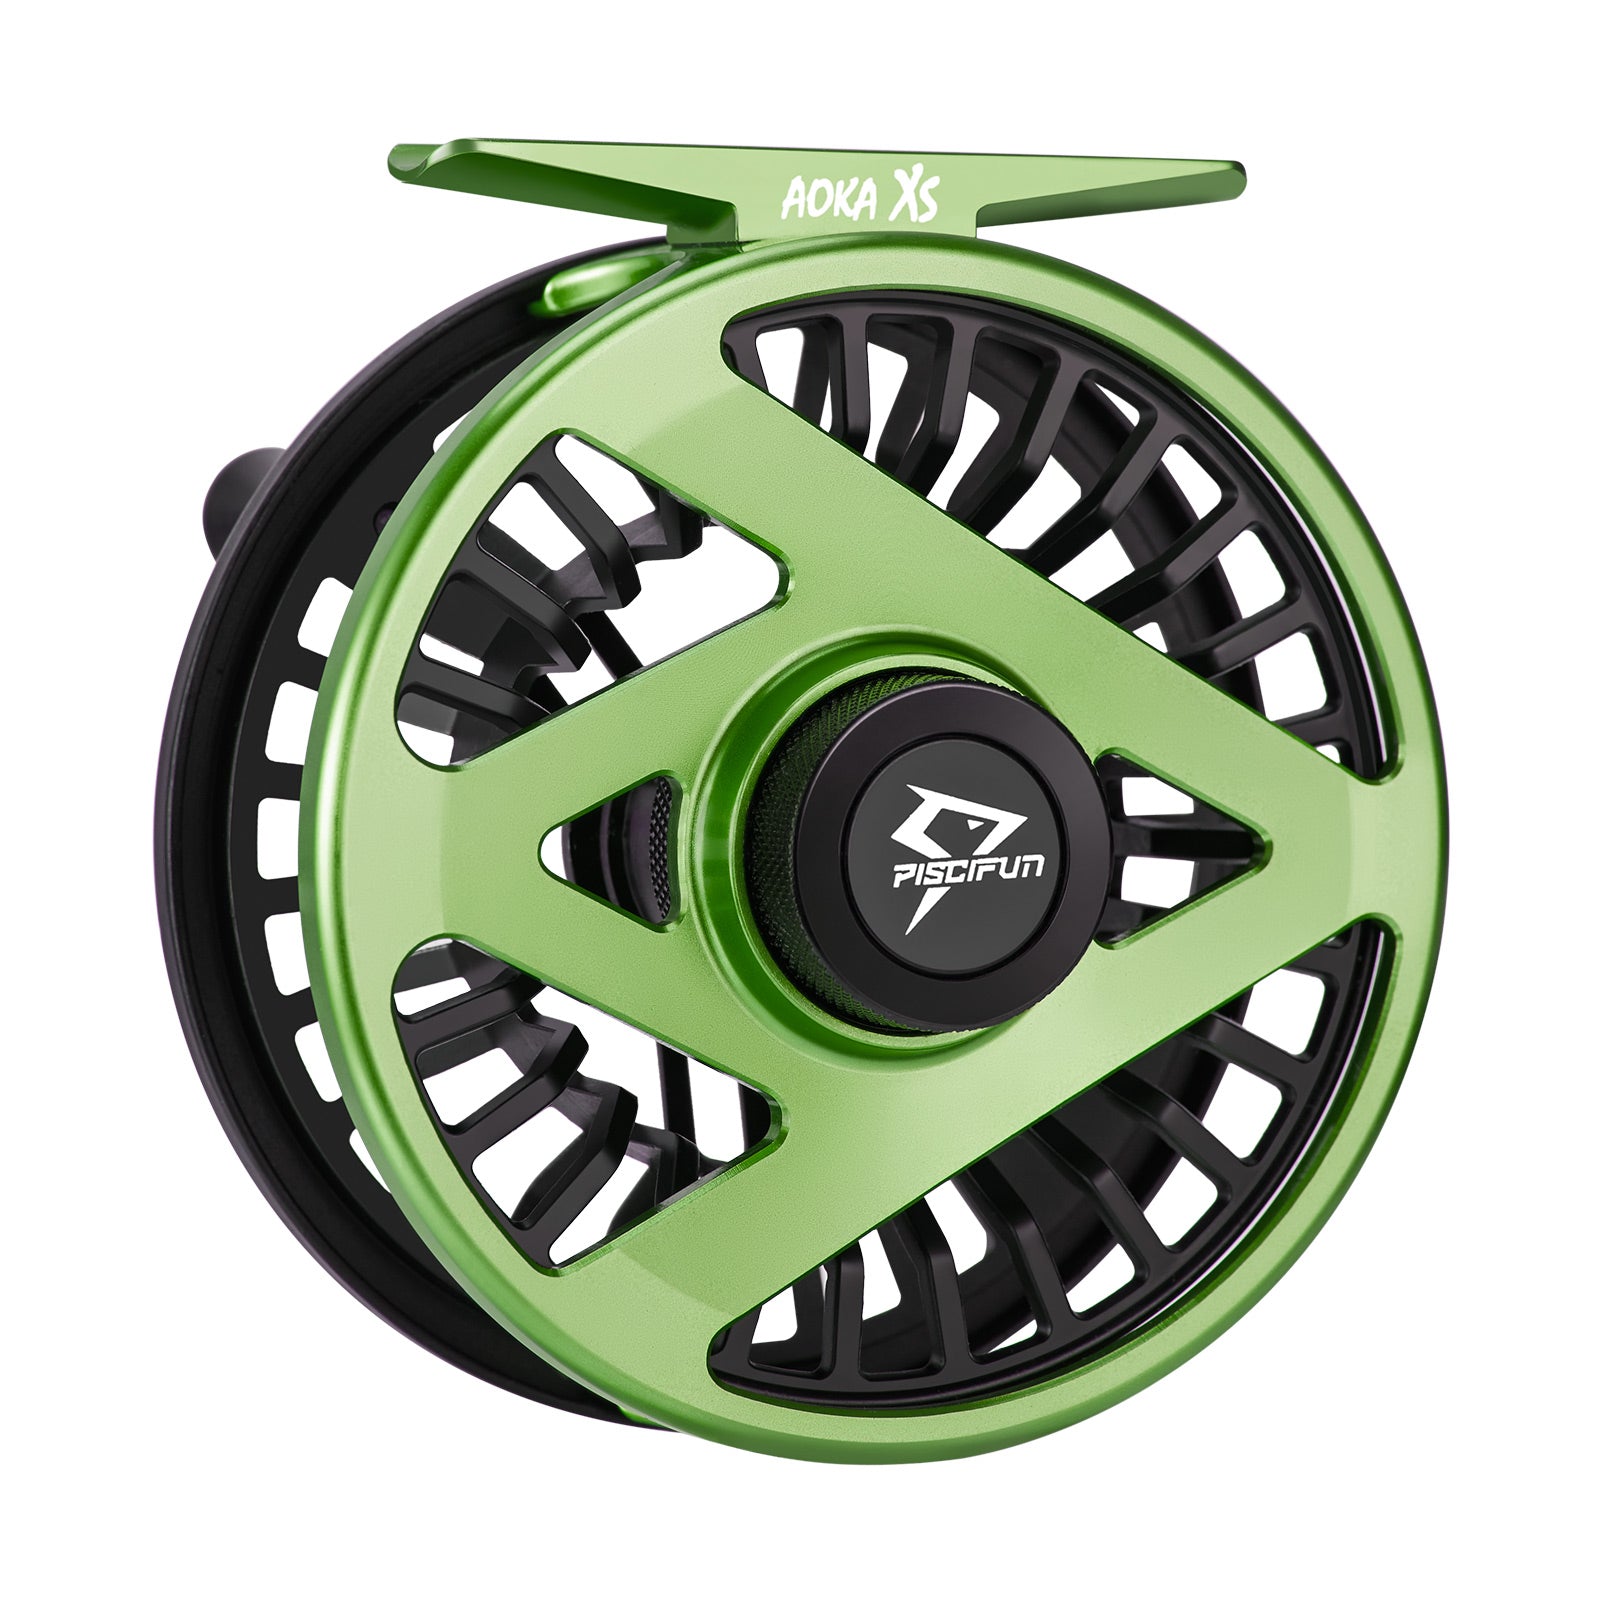 Piscifun® Aoka XS Fly Fishing Reel with Sealed Drag, CNC-machined Aluminum  Alloy Body Fly Reel